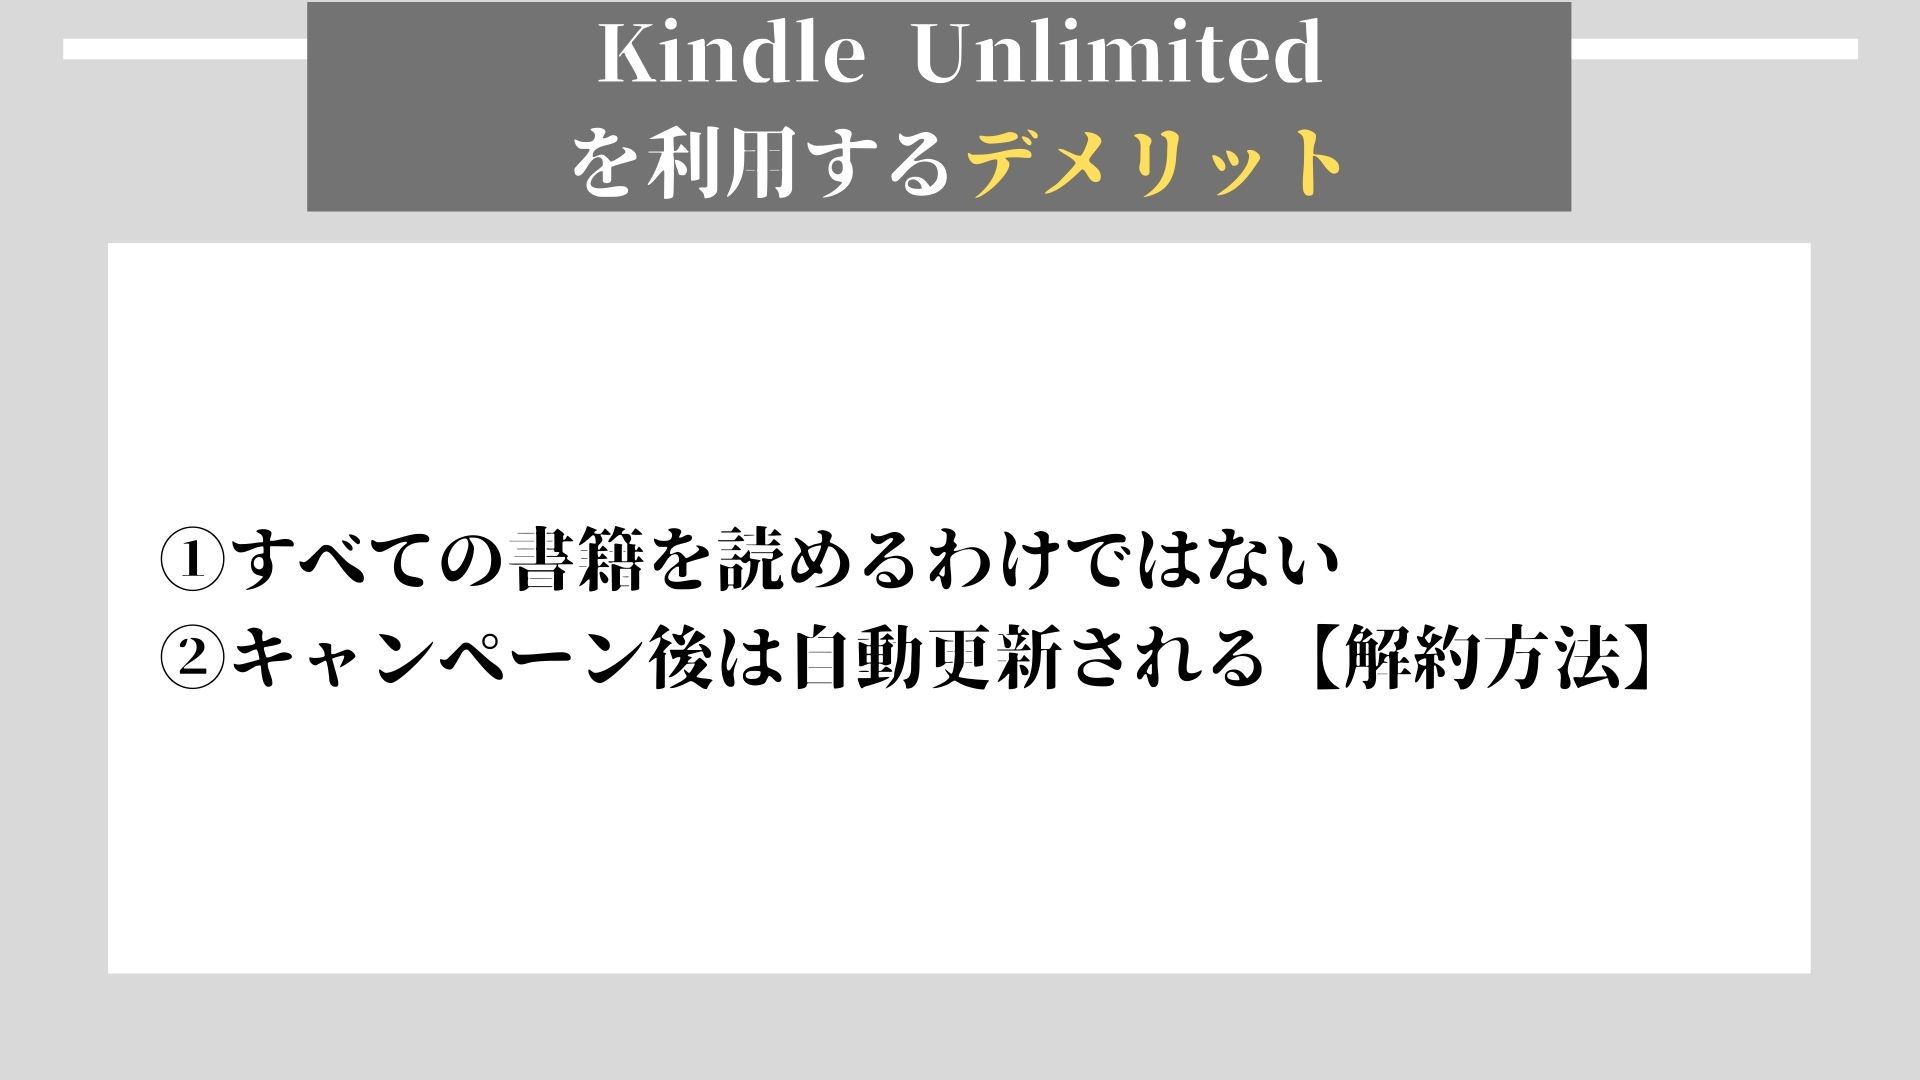 Kindle Unlimited デメリット